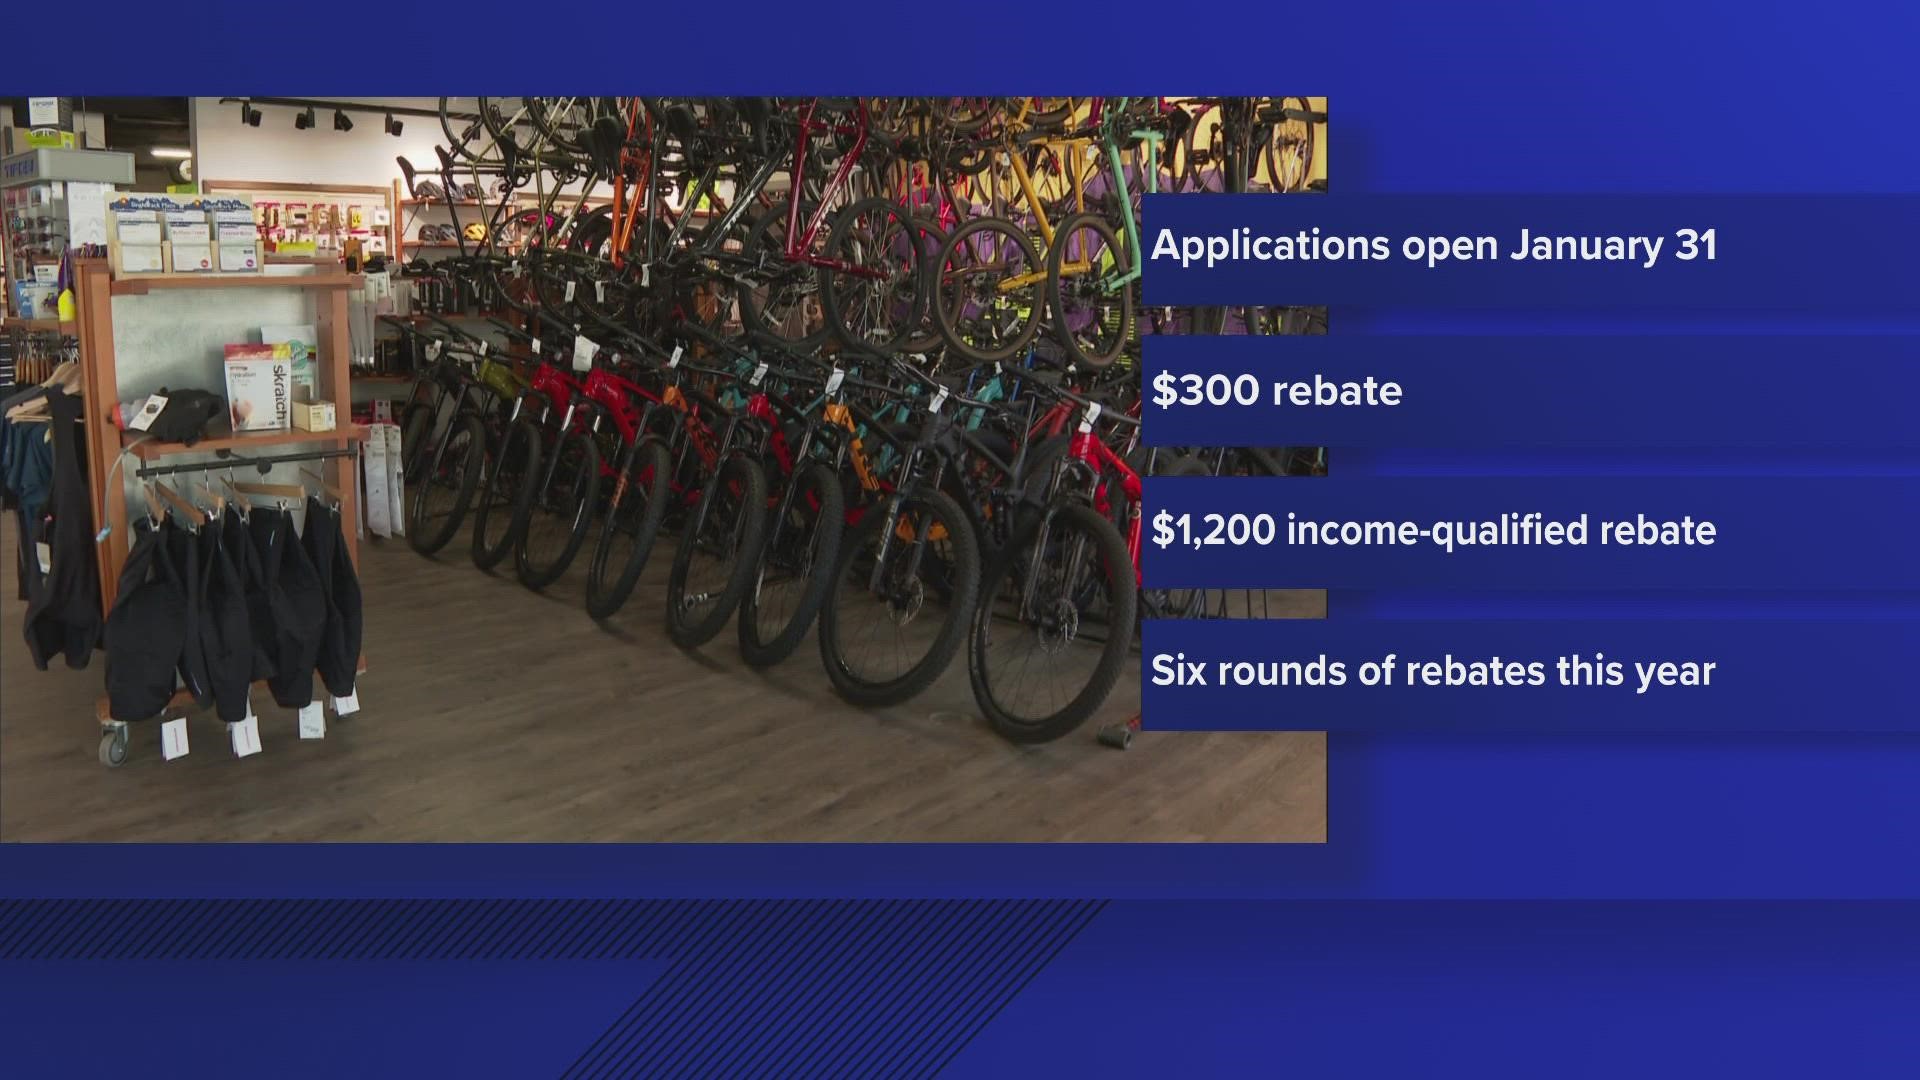 The next round of applications for e-bike vouchers opens on Jan. 31 at 11 a.m. The city said up to 860 rebate vouchers are up for grabs.